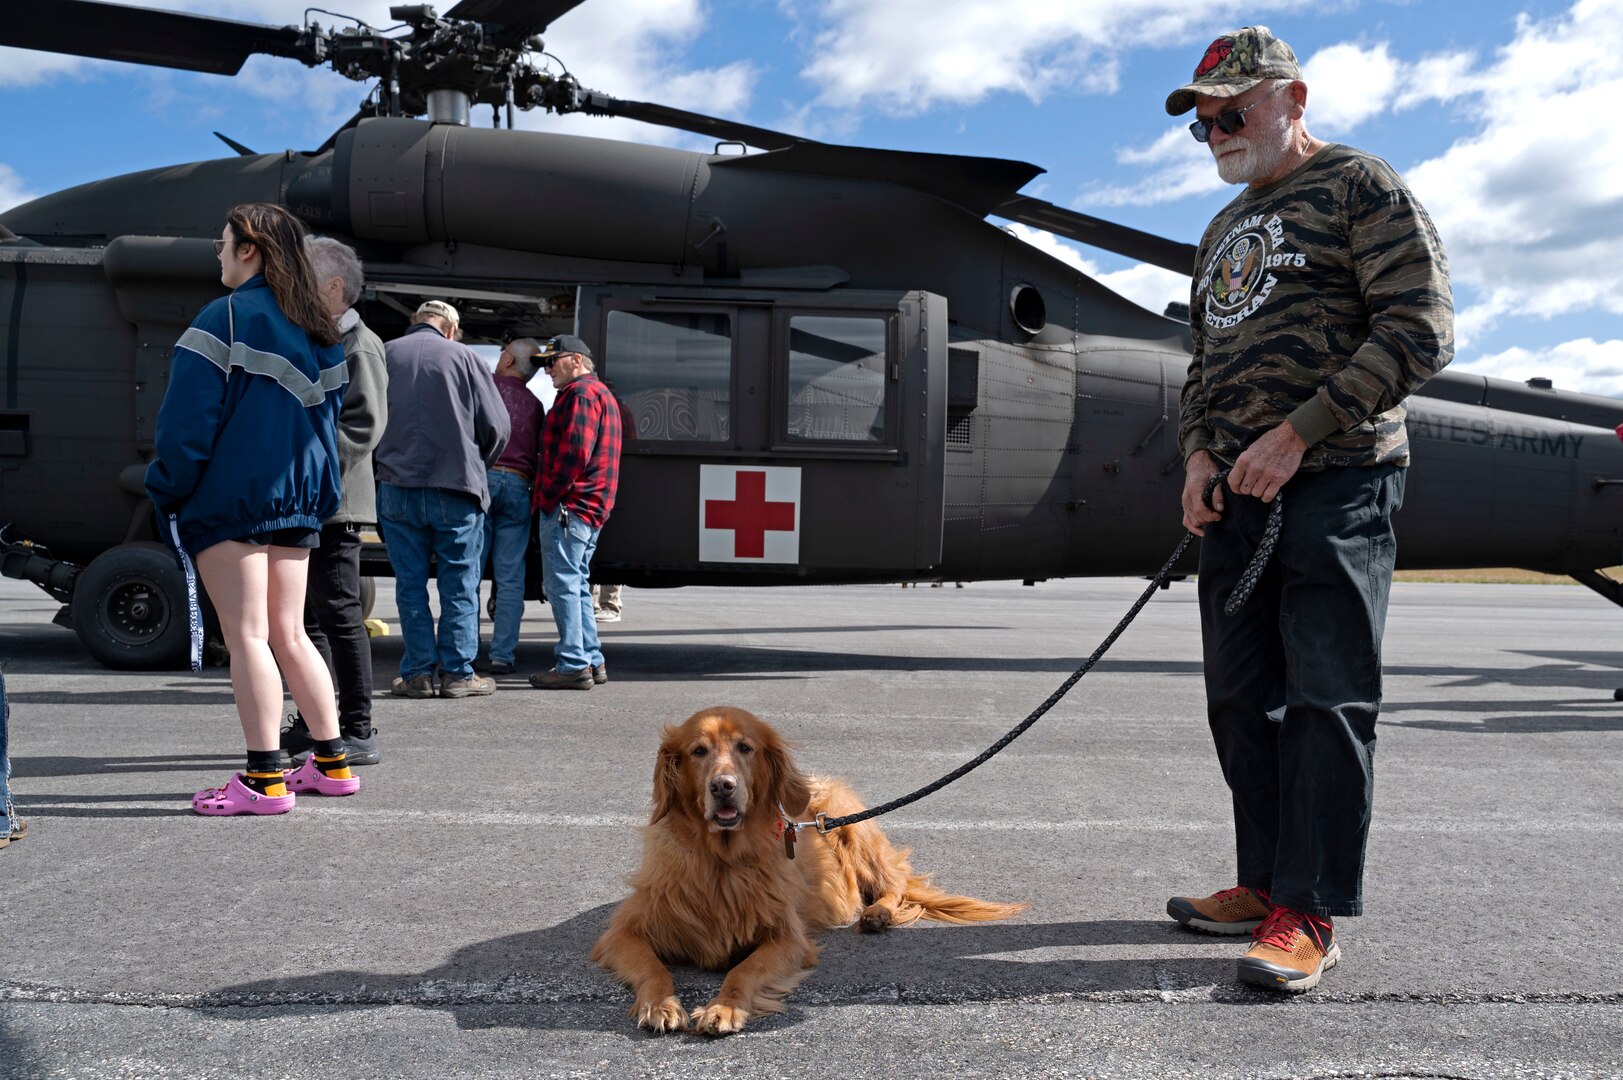 Lionel Turgeon of Milan and his rescued pet, Maverick, take a break alongside a NHARNG Black Hawk helicopter during a Berlin Regional Airport open house Sept. 16, 2022, in Milan, New Hampshire.